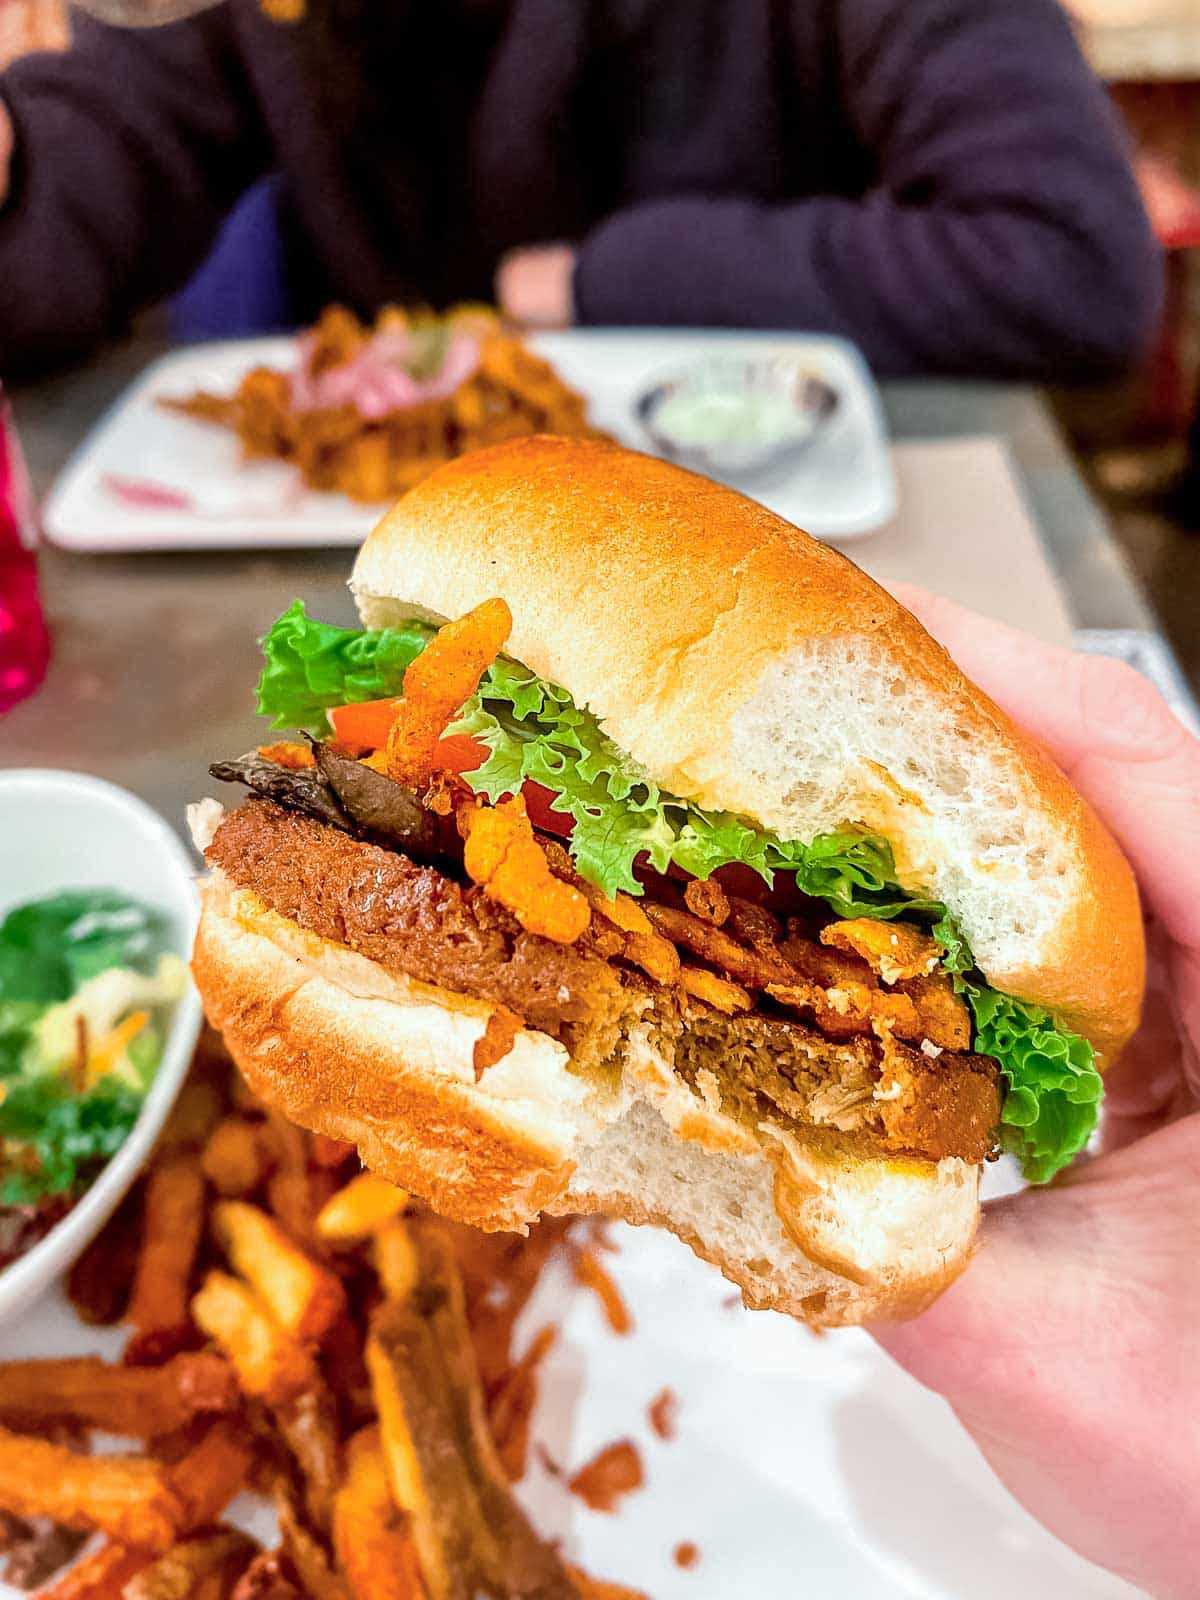 25 Best Vegan Restaurants in Vancouver BC for 2023 - burger with fries from MeeT